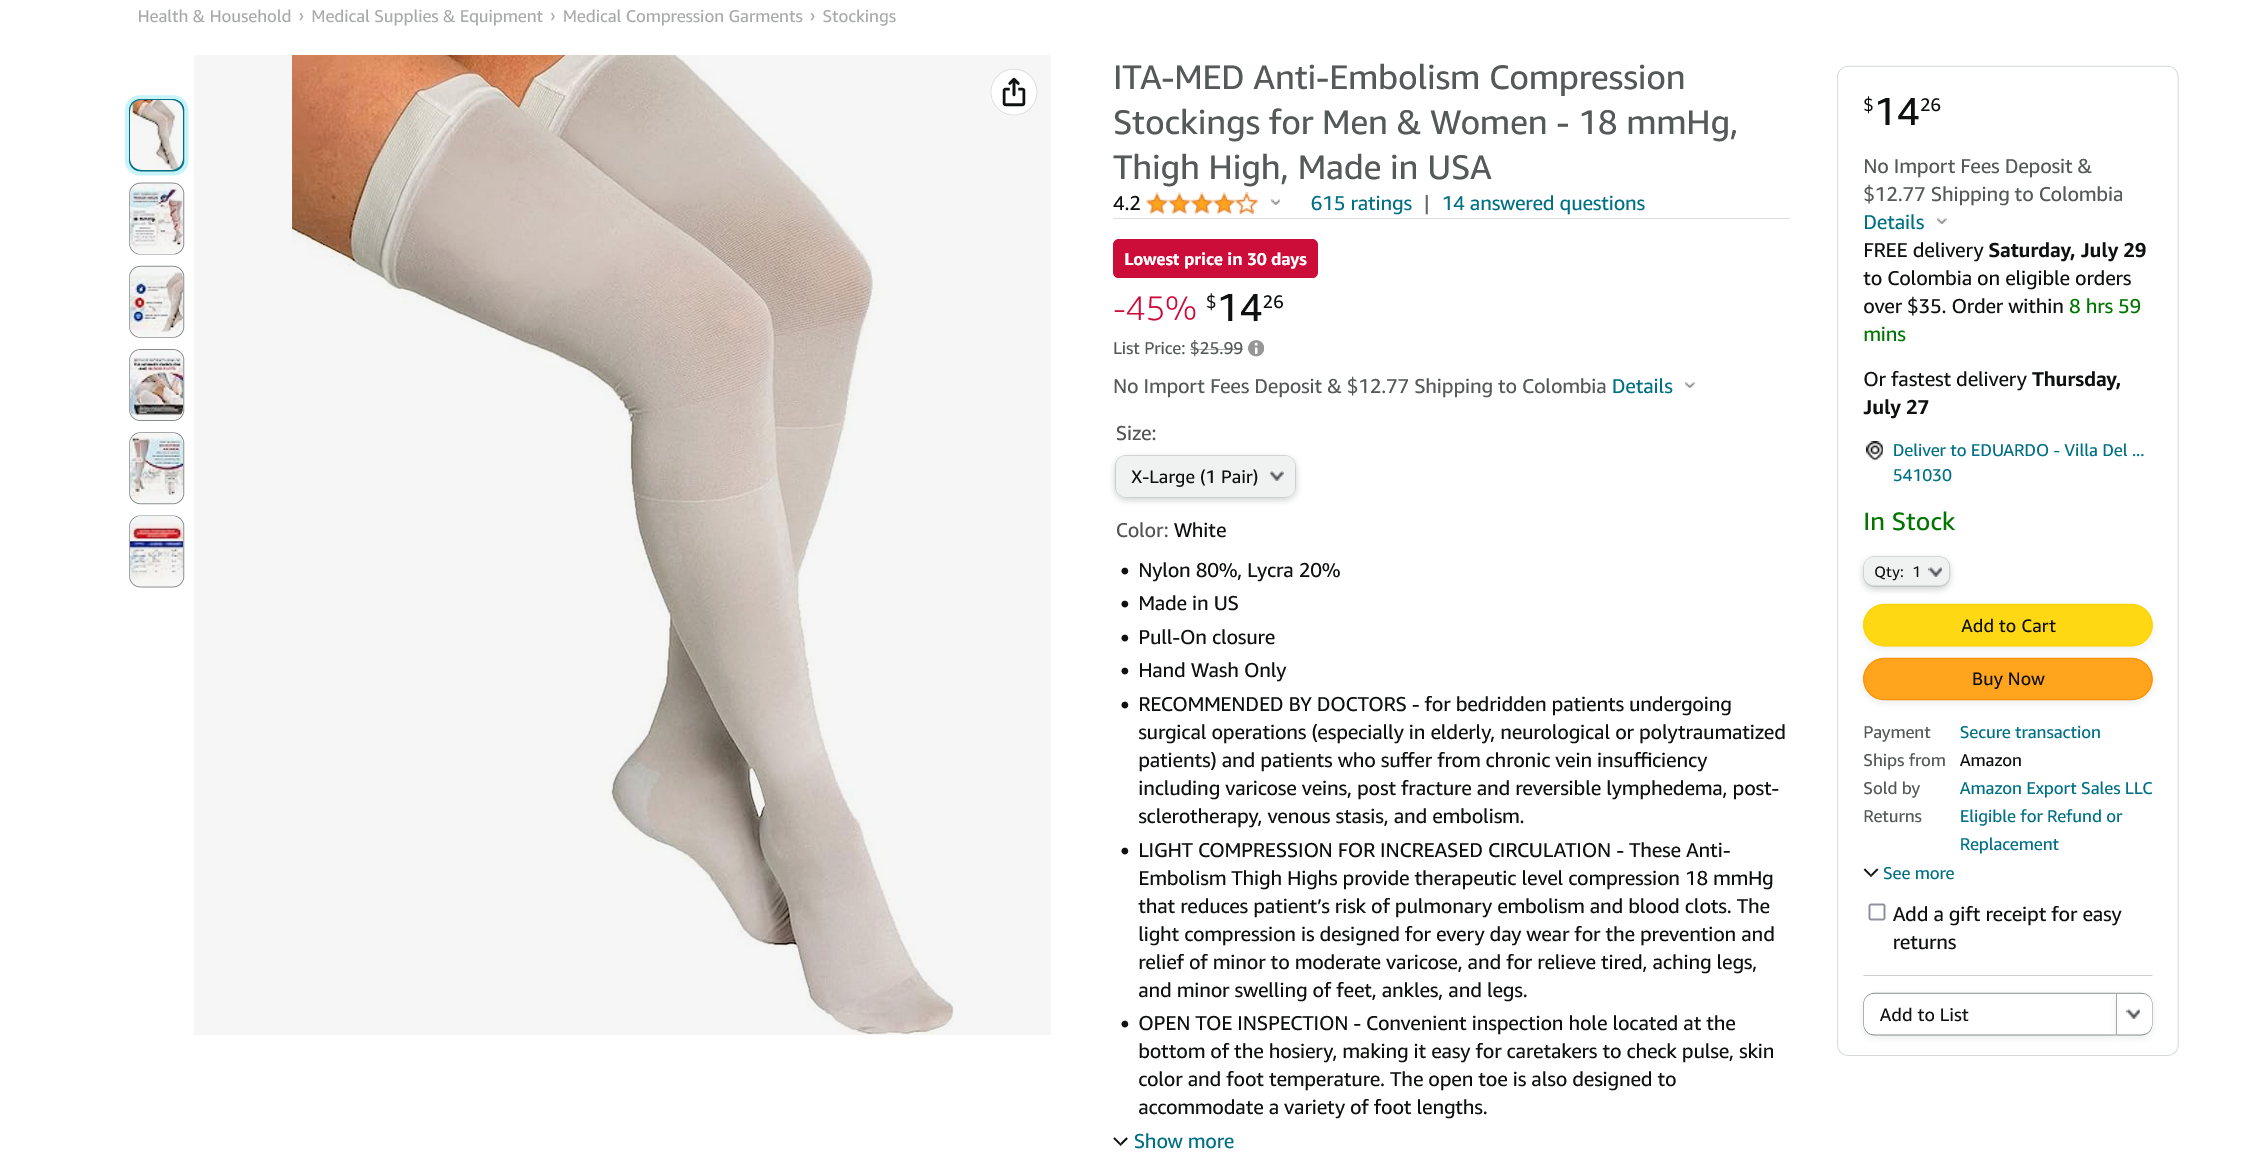 Screenshot 2023-07-14 at 16-00-05 Amazon.com ITA-MED Anti-Embolism Compression Stockings for M...png